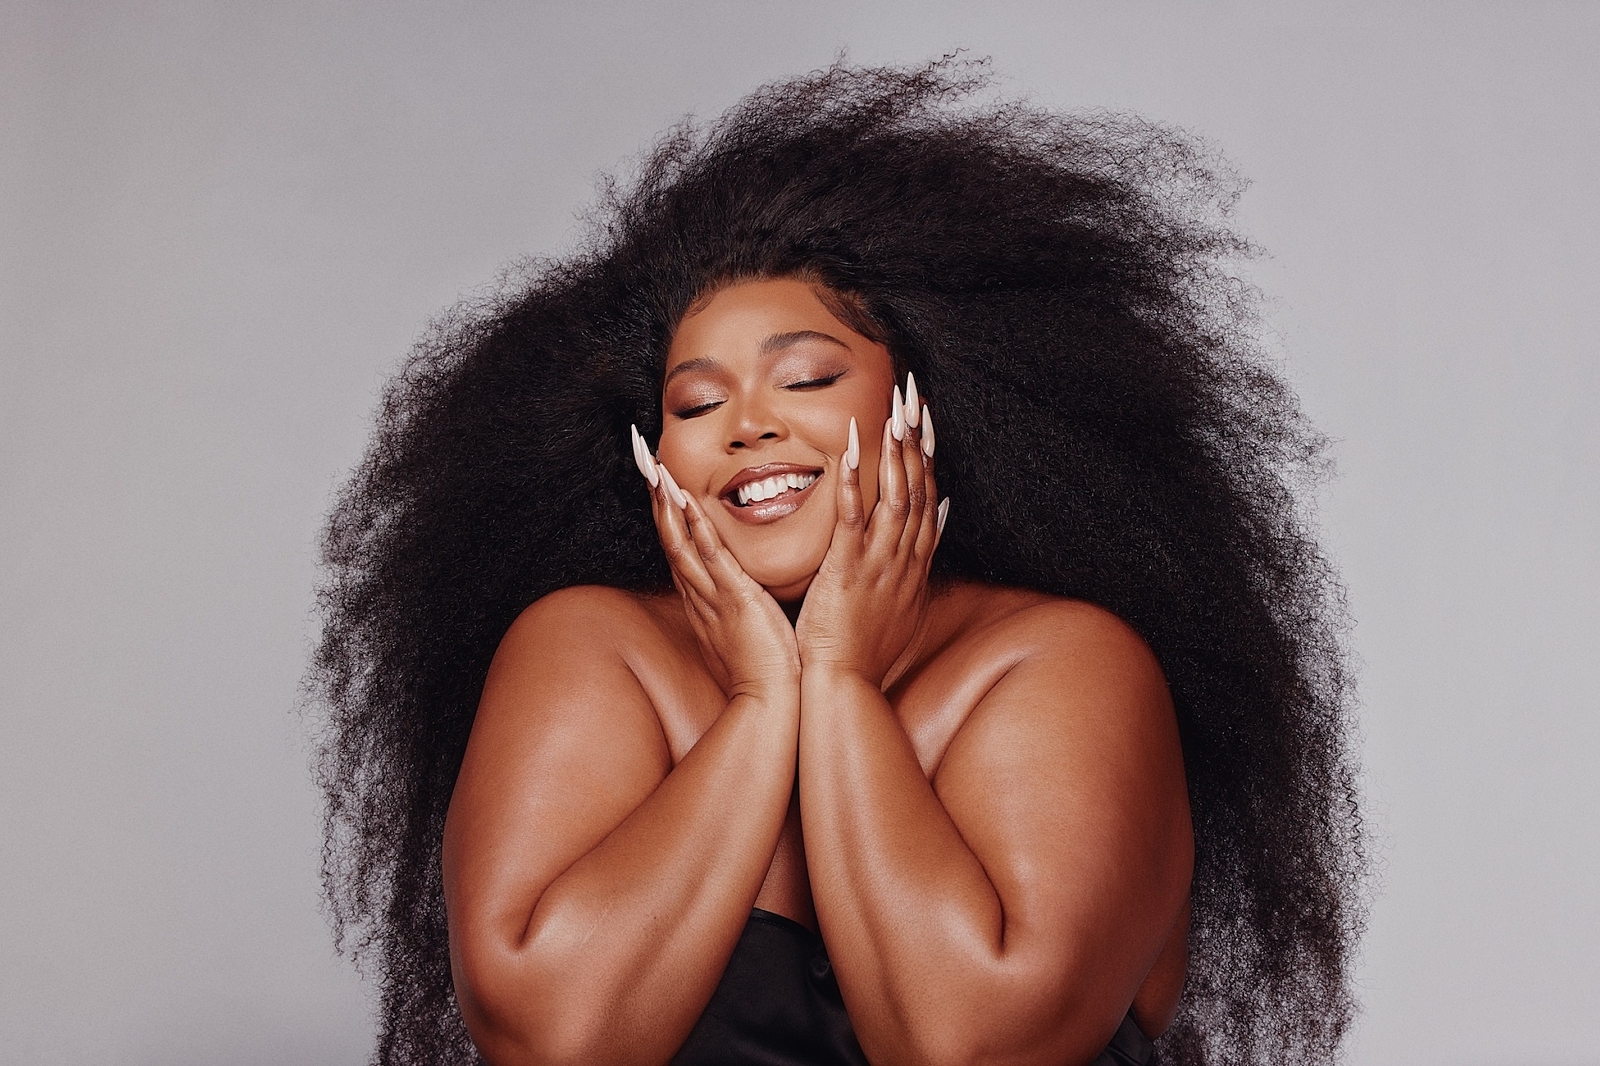 Lizzo shares 'Special' remix with SZA